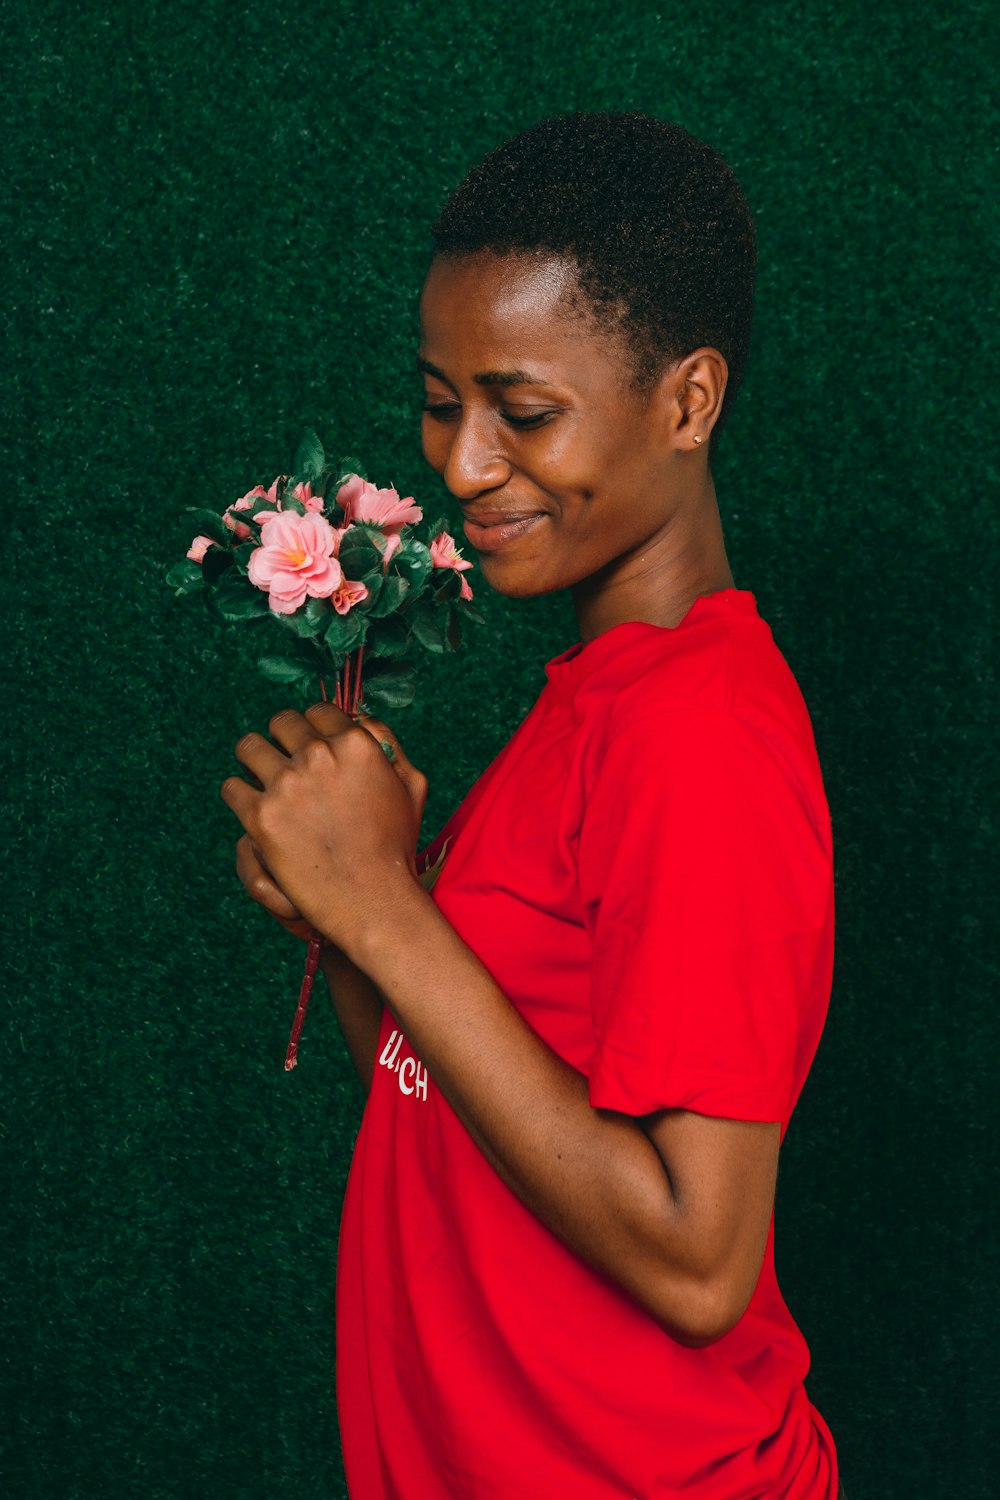 a woman in a red shirt holding a bouquet of flowers